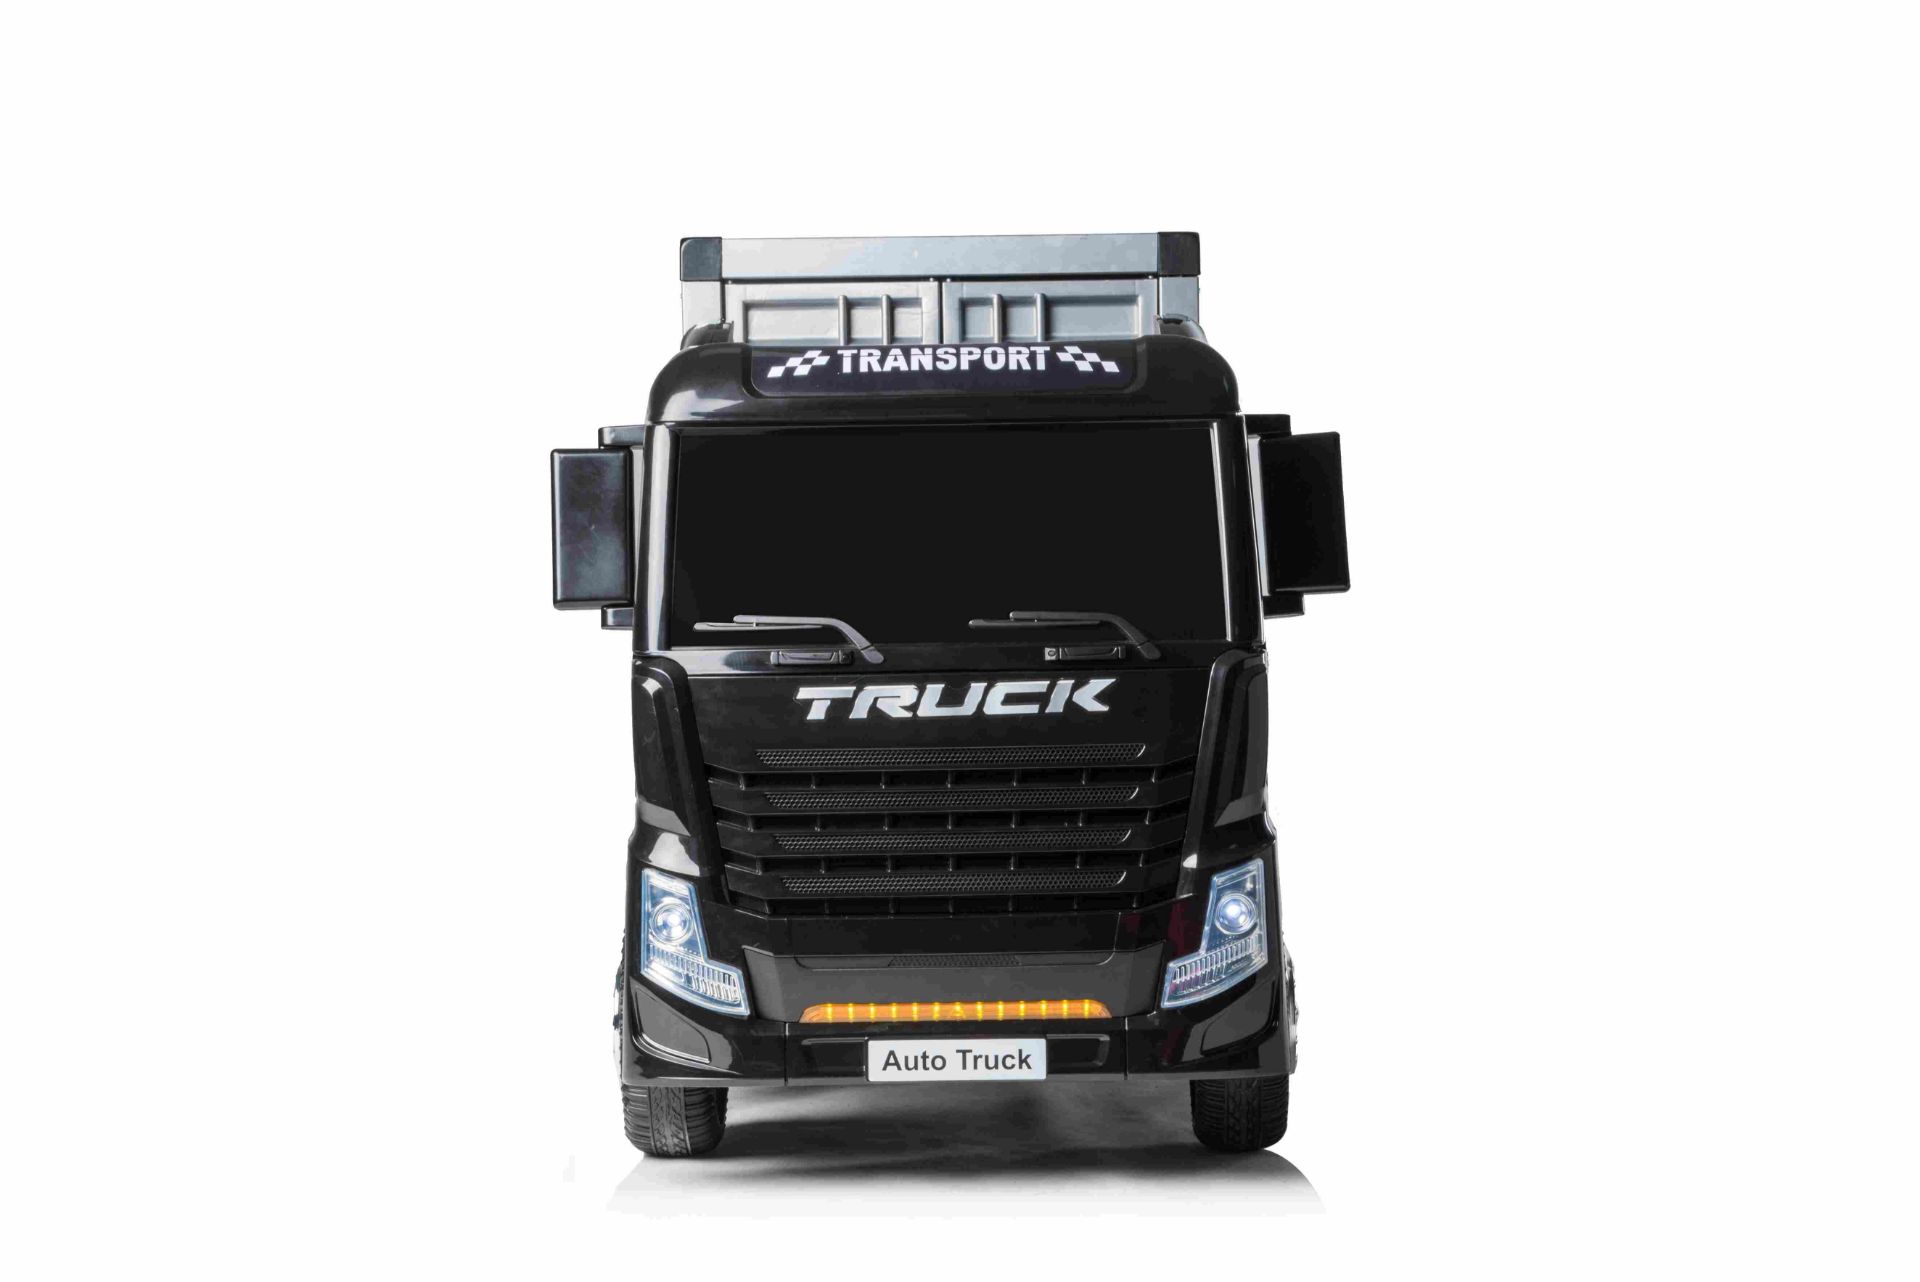 RIDE ON TRUCK WITH DETACHABLE CONTAINER AND PARENTAL REMOTE CONTROL 12V 4 WHEEL DRIVE JJ2011 - BLACK - Image 2 of 5